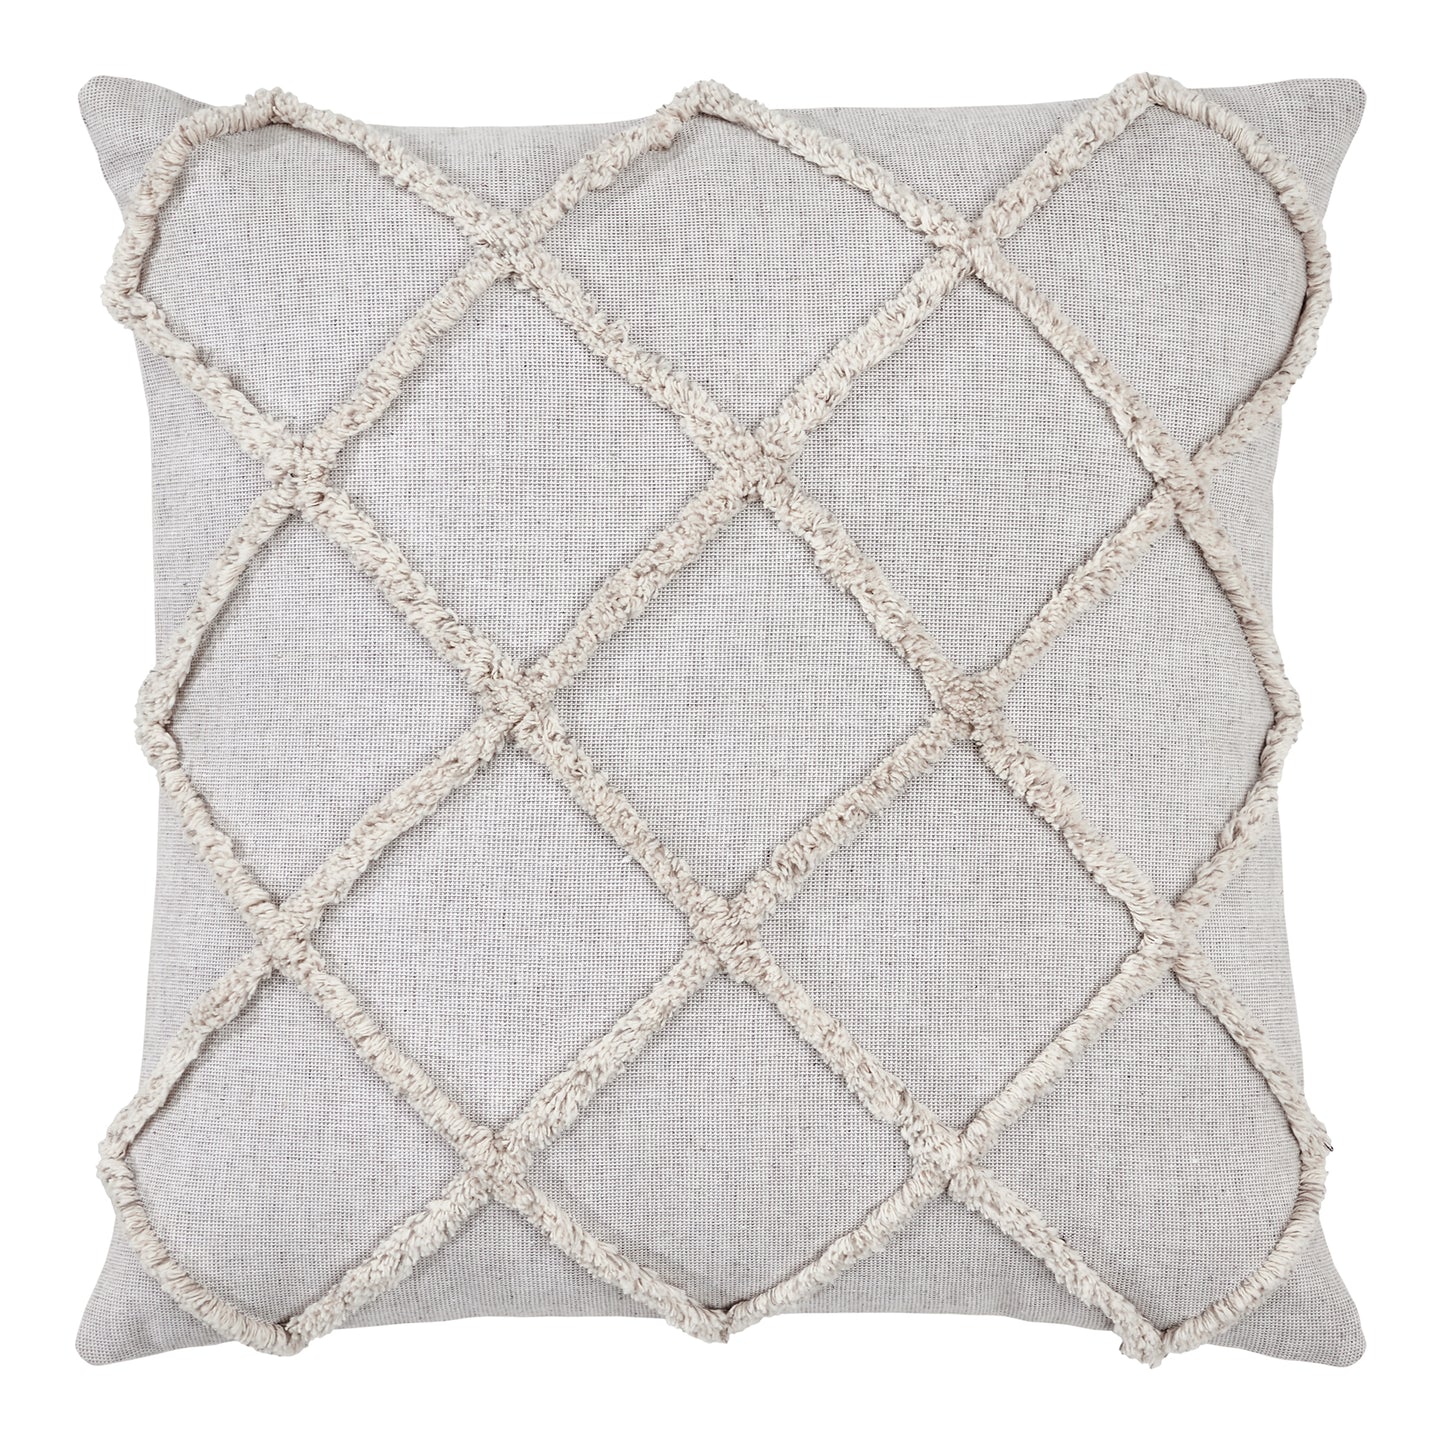 80521-Frayed-Lattice-Oatmeal-Pillow-Cover-20x20-image-5